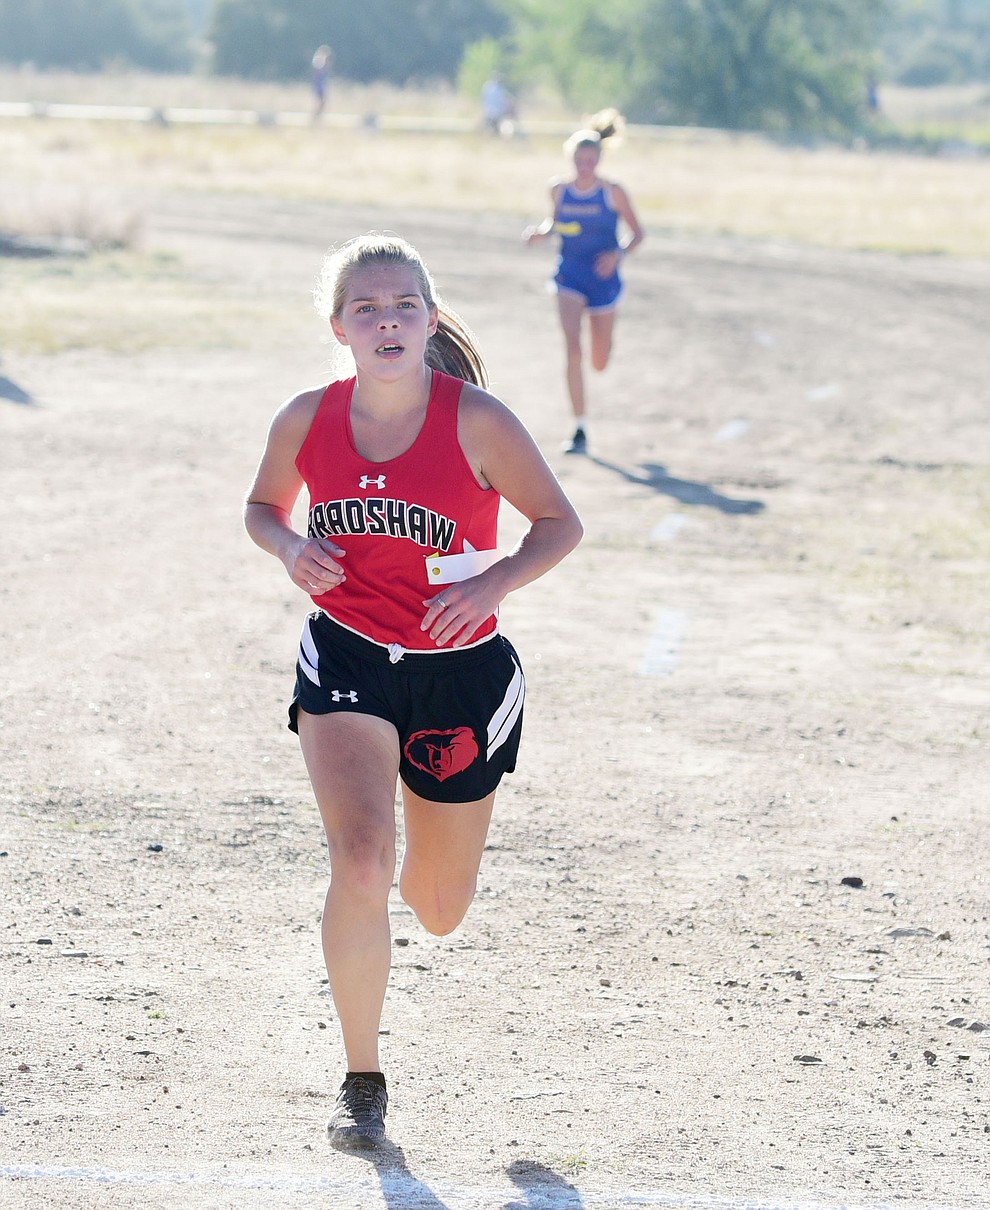 Bradshaw Mountain's Ann Zea finished second during the Yavapai County Cross Country meet at Embry Riddle Aeronautical University in Prescott Wednesday, October 19.